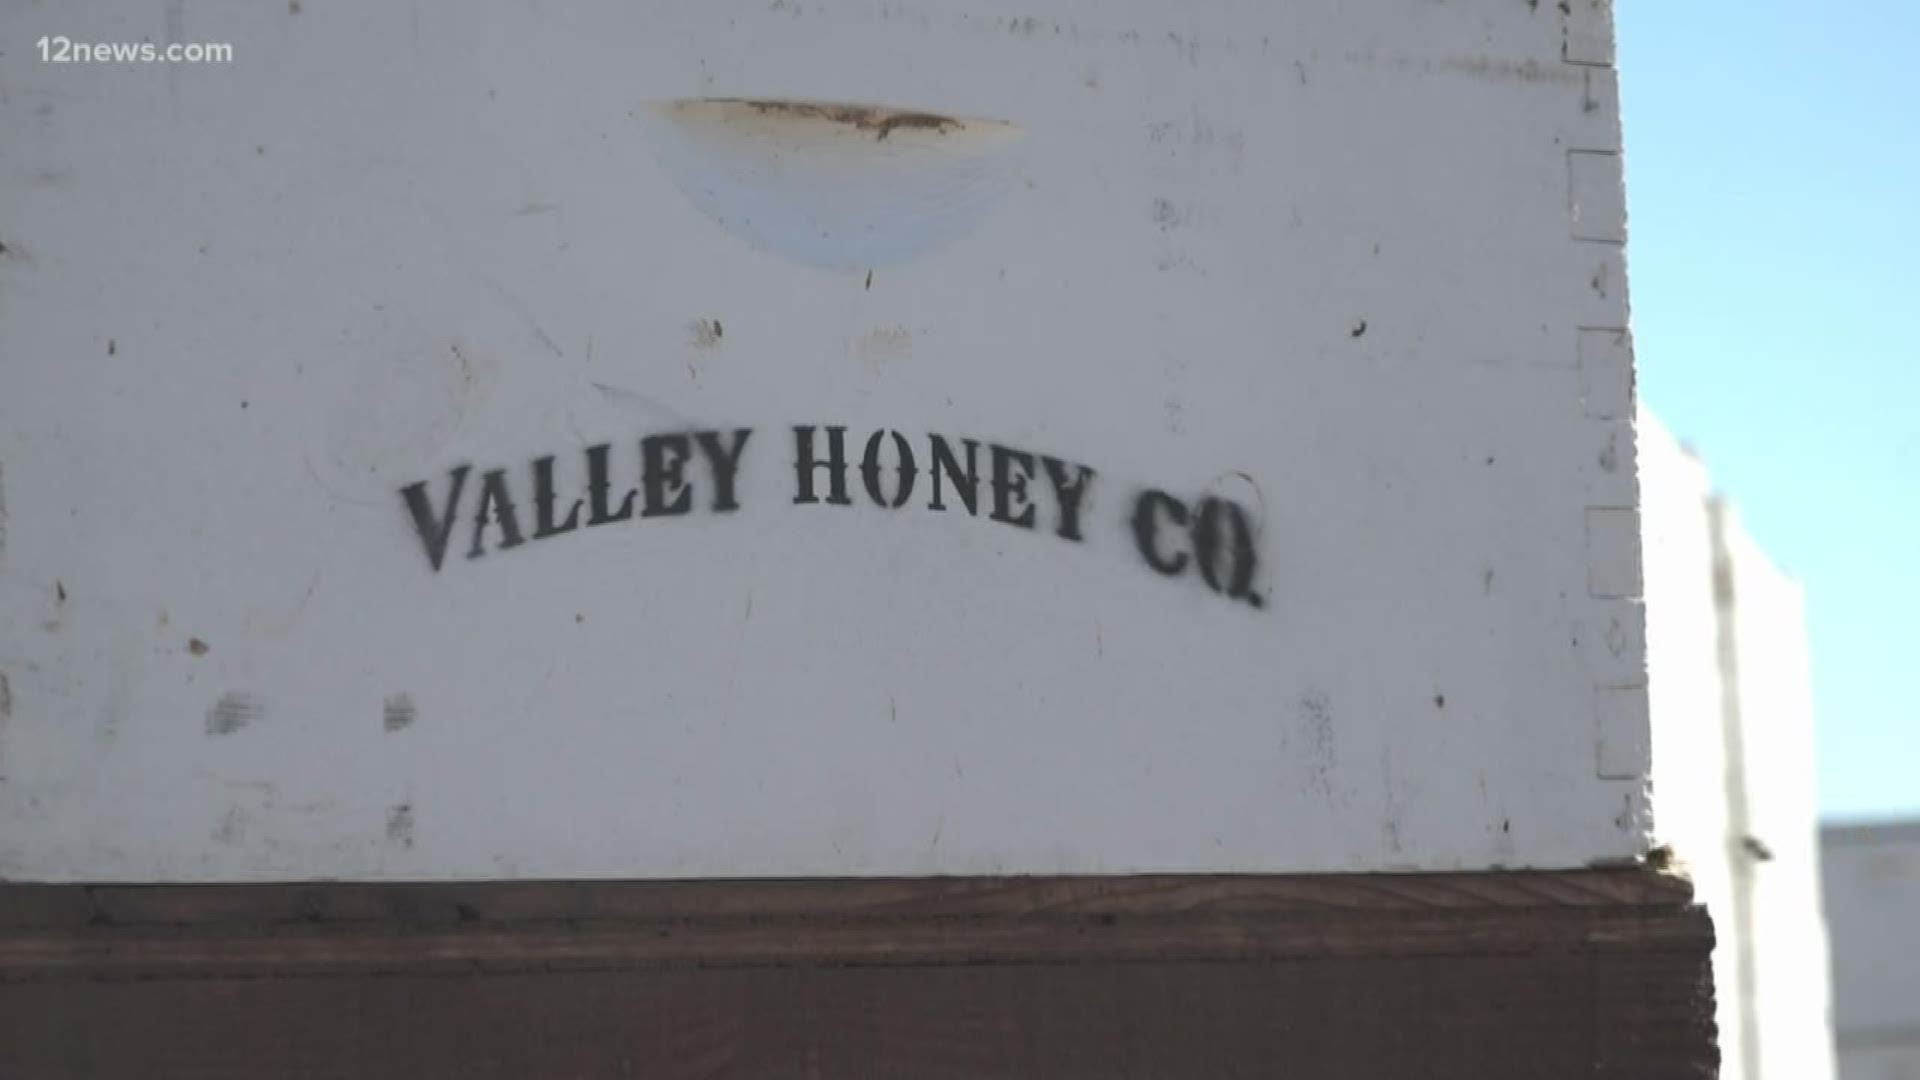 More than $50,000 worth of bees were stolen from an East Valley honey company. Luckily, the bees were returned to Valley Honey Company.